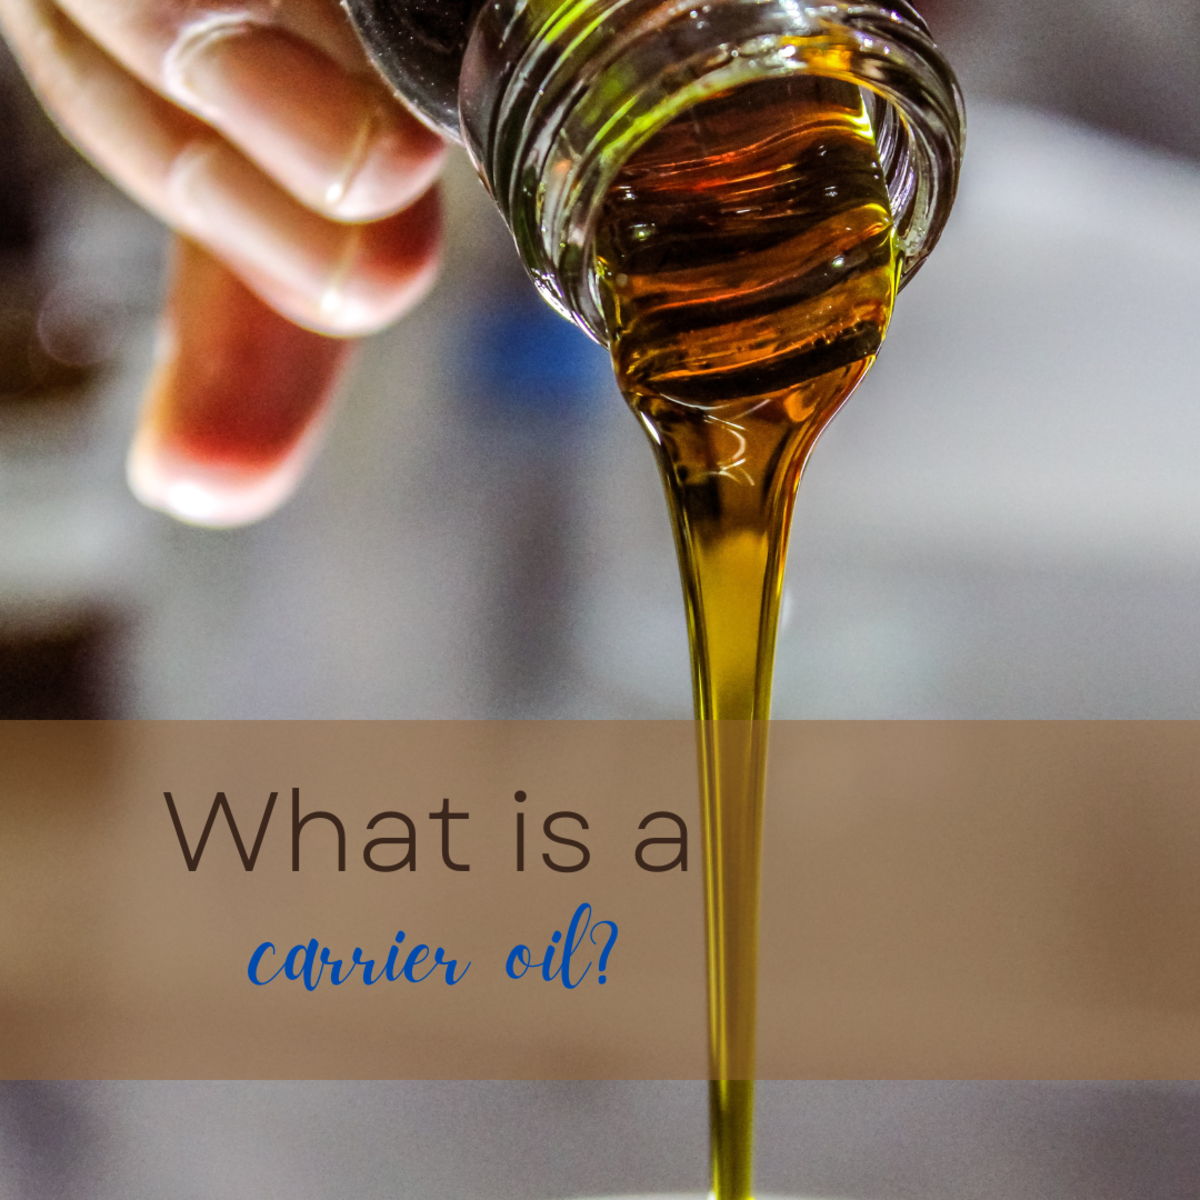 What is a carrier oil?